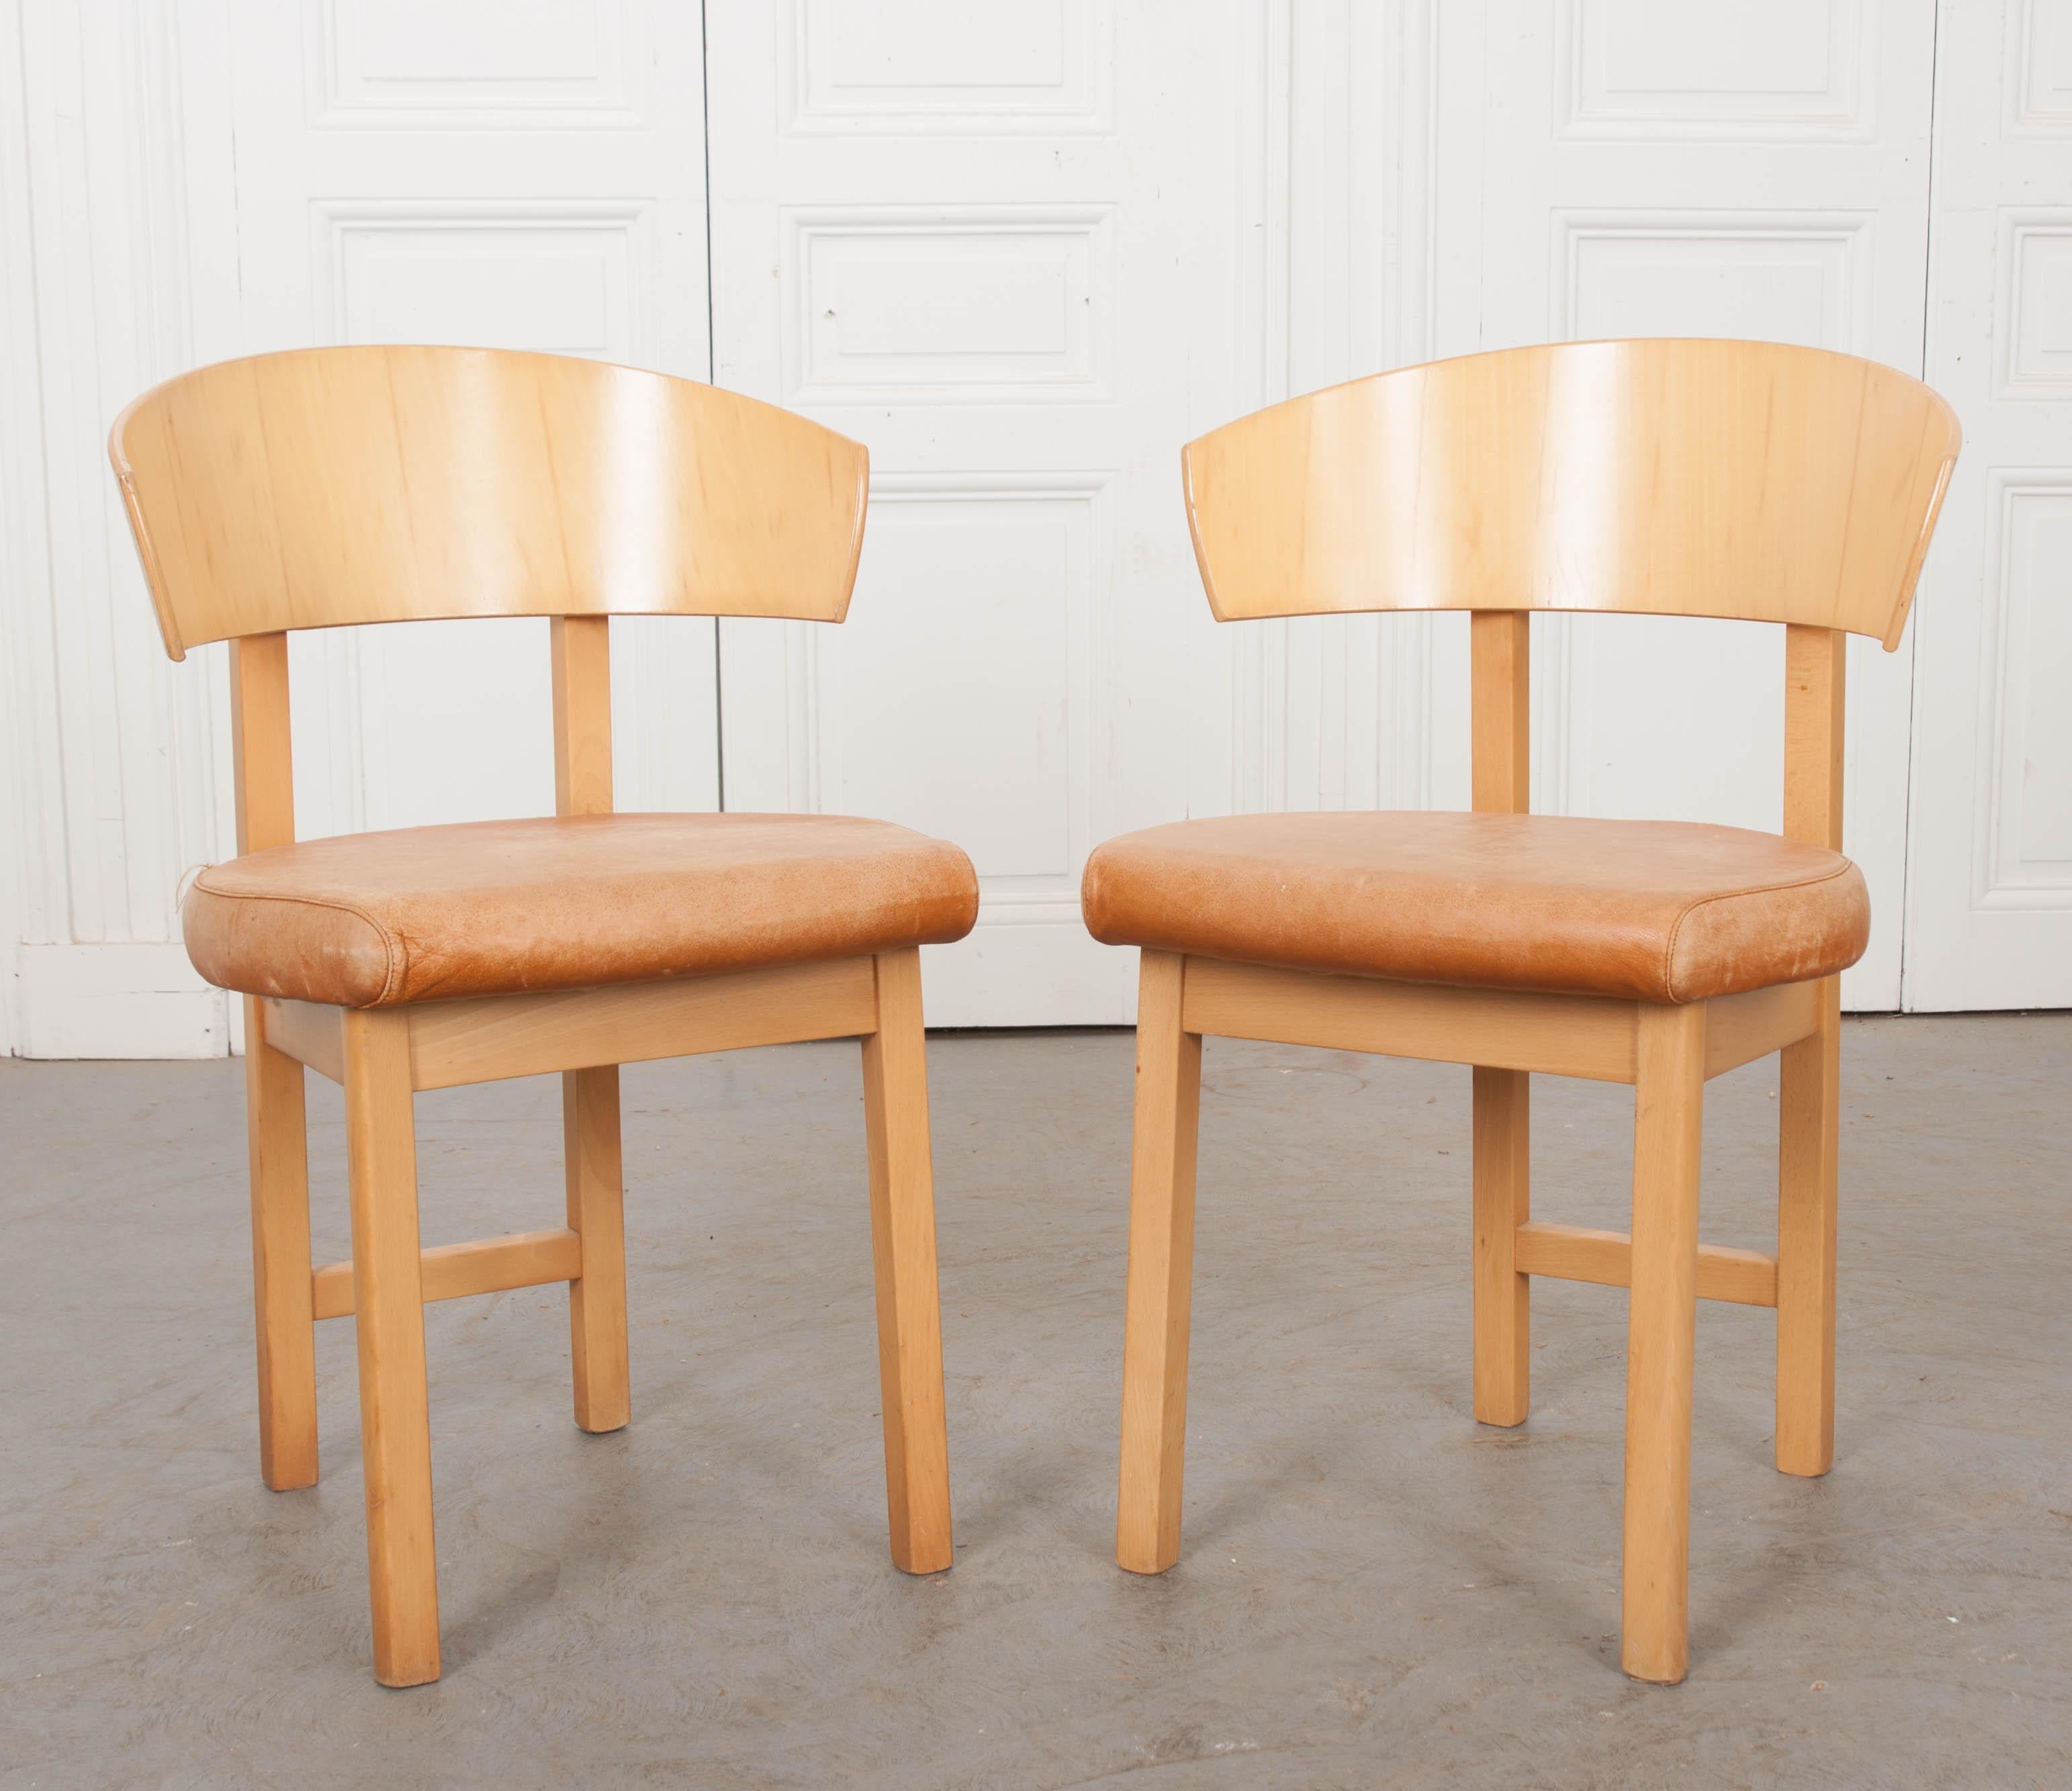 This fantastic pair of vintage Art Deco-style blonde wood side chairs are from France. The low, open chair backs and thin, linear legs, give these chairs a geometric profile indicative of the era. They would add a fun eclectic vibe to any room!